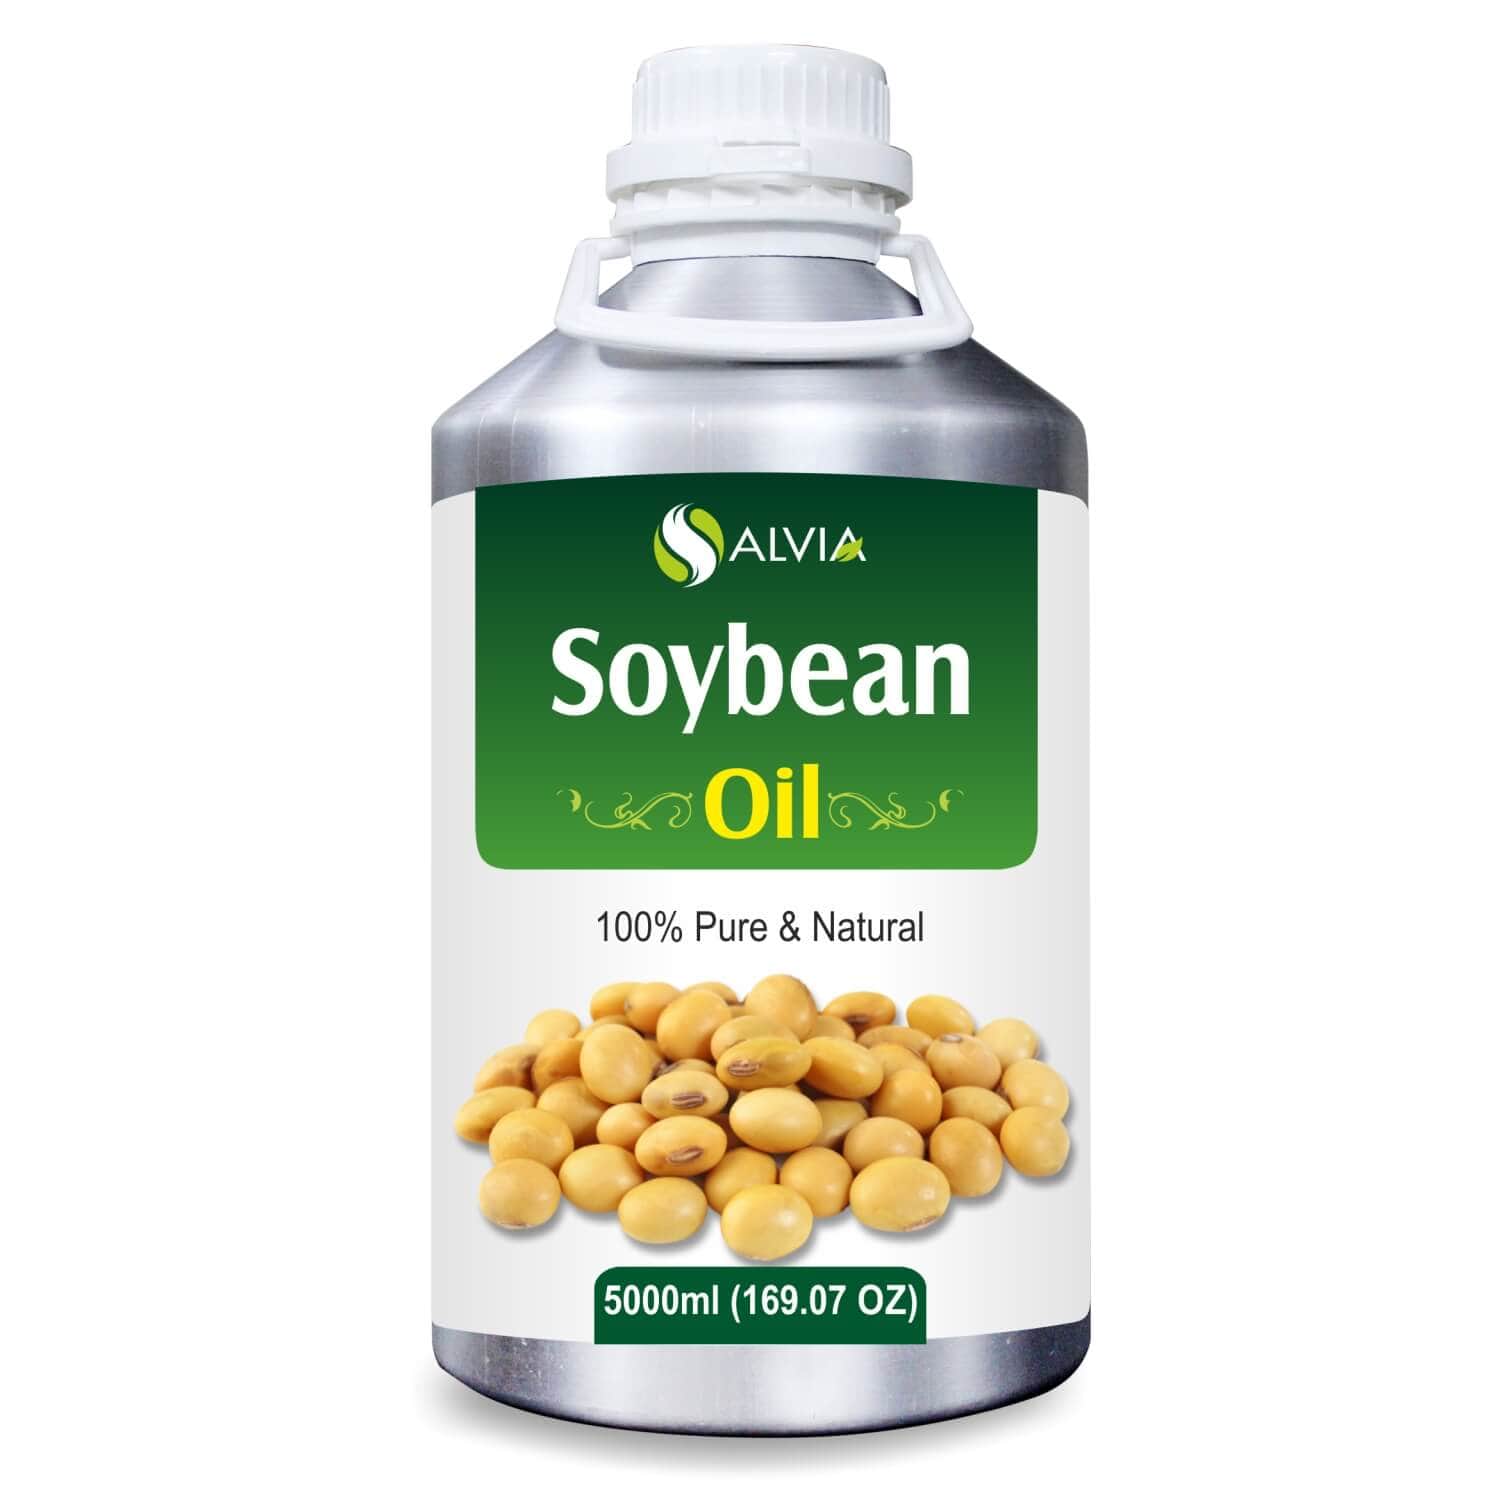 Salvia Natural Carrier Oils 5000ml Soybean Oil (Glycine Max) 100% Natural Carrier Oil, Moisturizes The Skin, Solves Itchy Scalp, Antioxidant & Rich in Vitamin E, Best For Aromatherapy